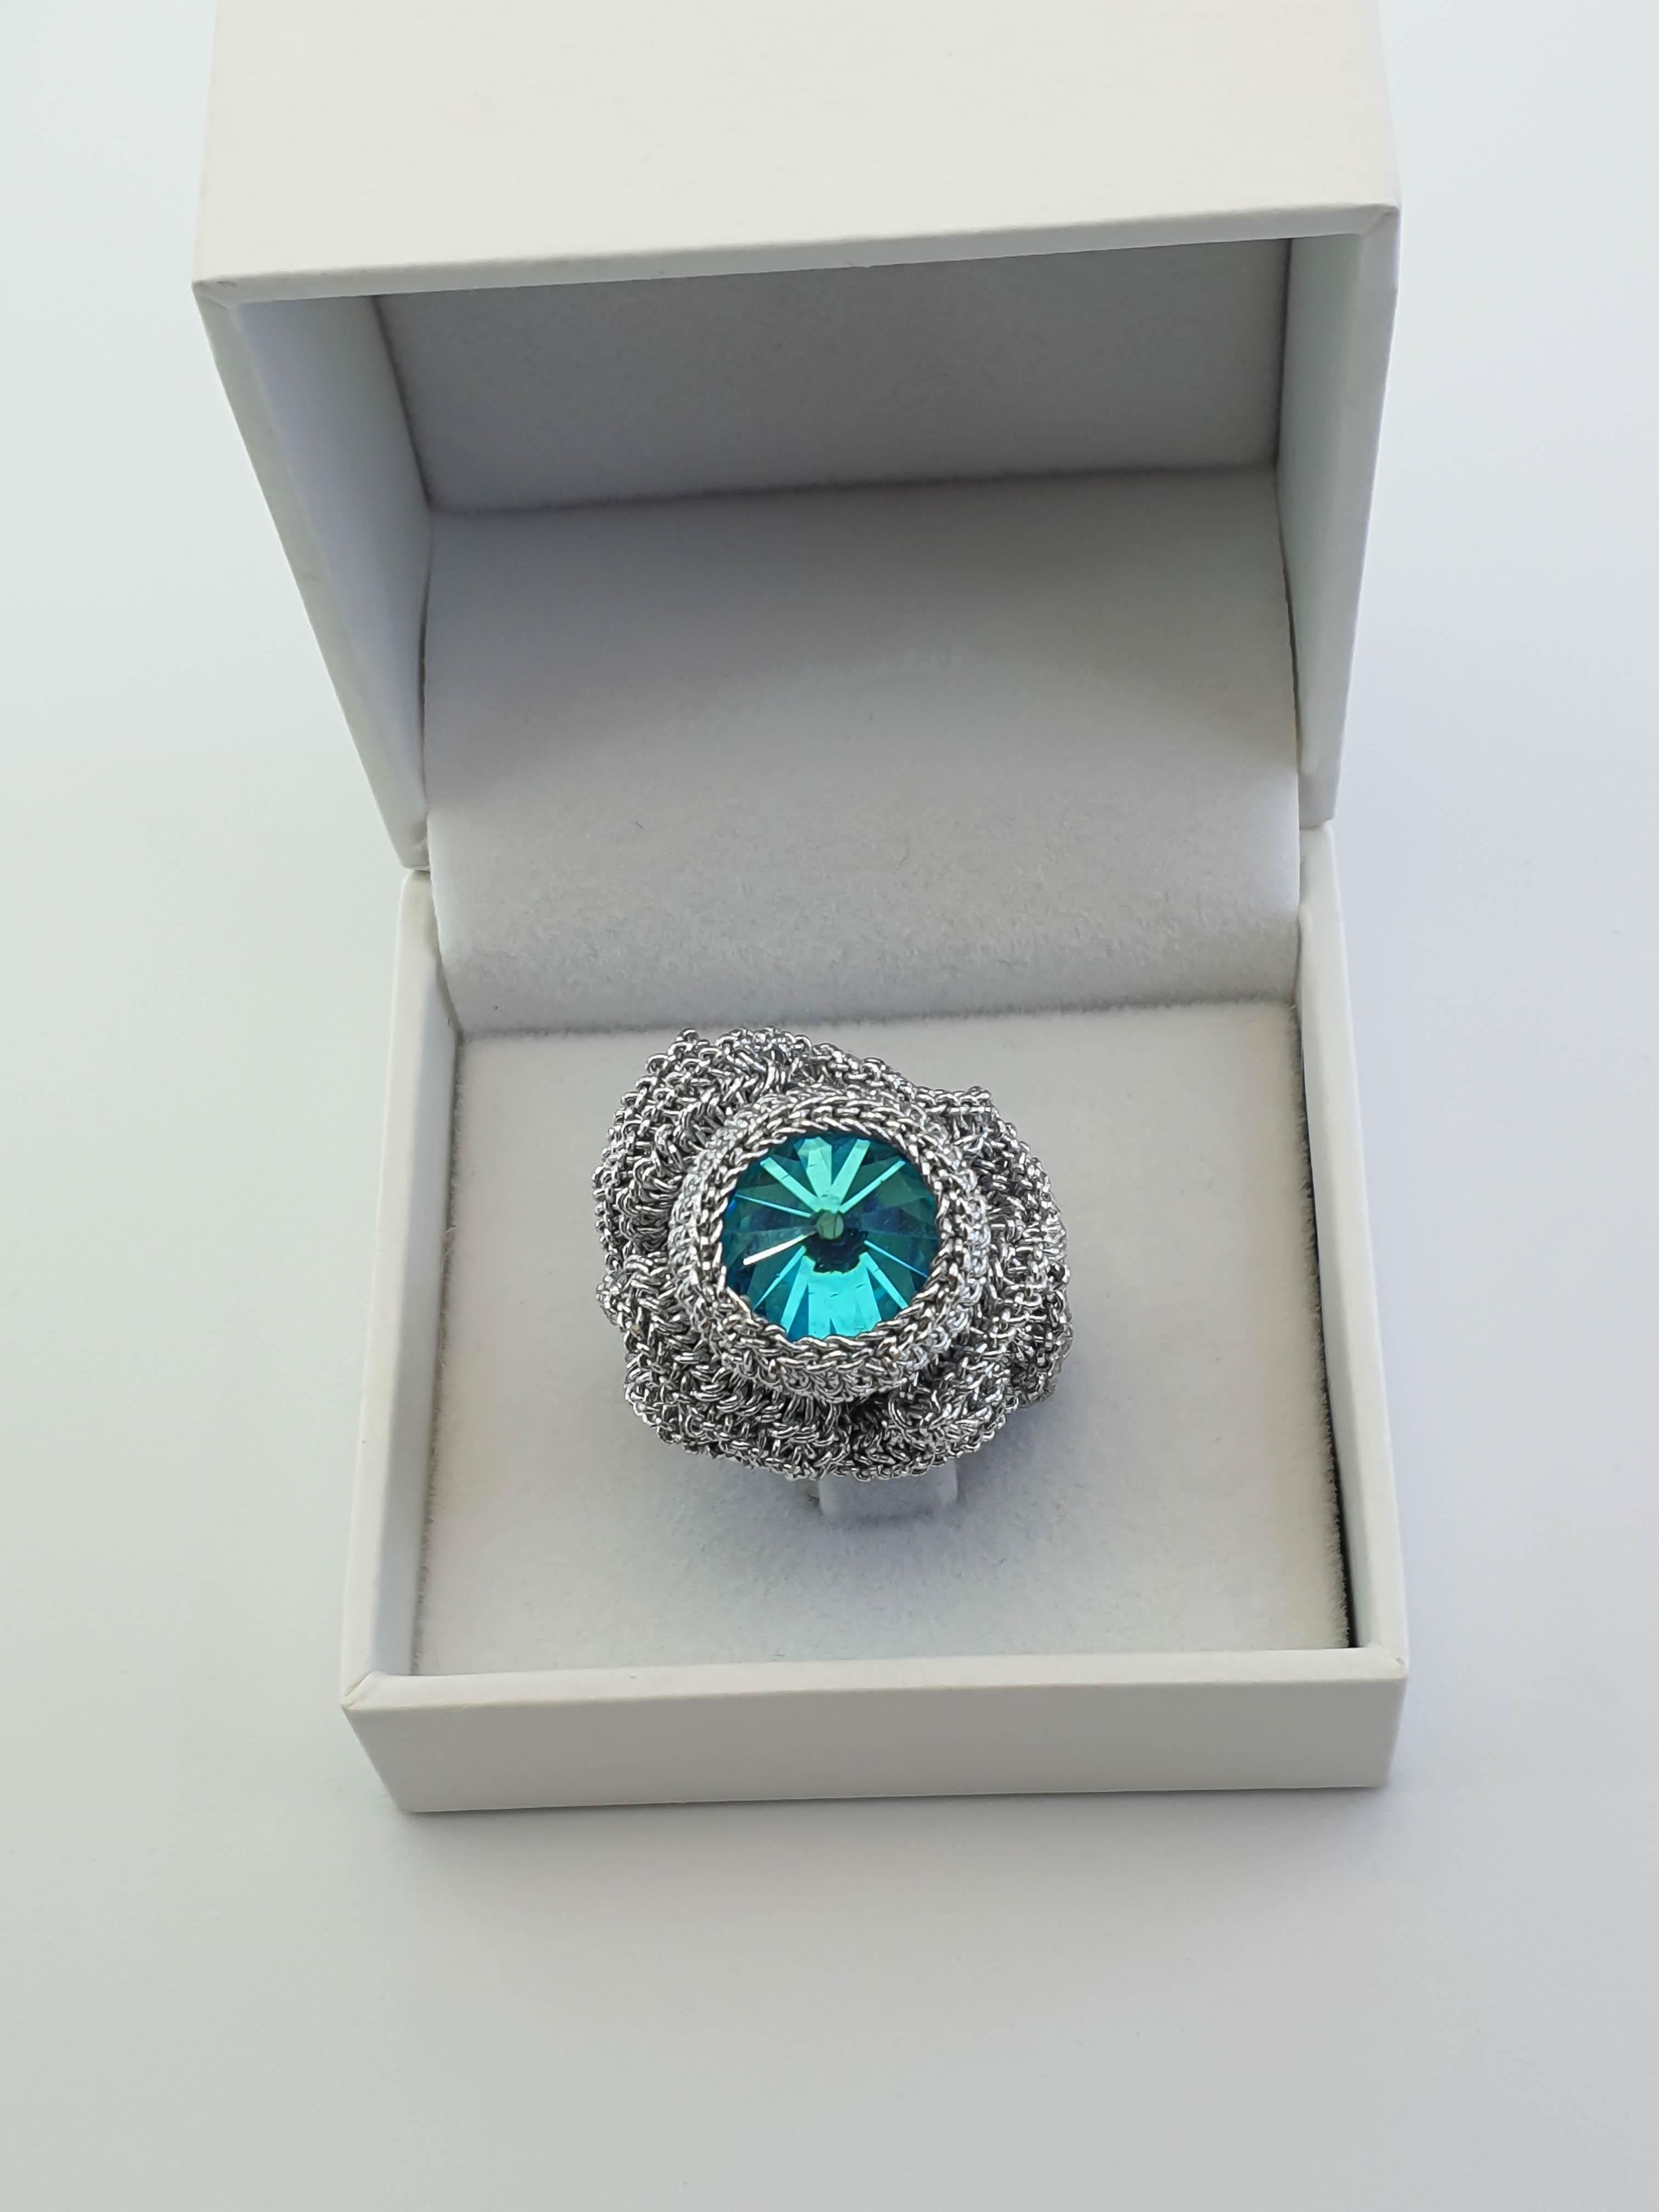 Contemporary handcrafted crochet  cocktail ring. Silver color thread, tightly crochet around sky blue color Swarovski Crystal. 
This ring is a US 6 size.
This ring can be custom made to size.

The ring is crochet with a smooth passing thread. It is